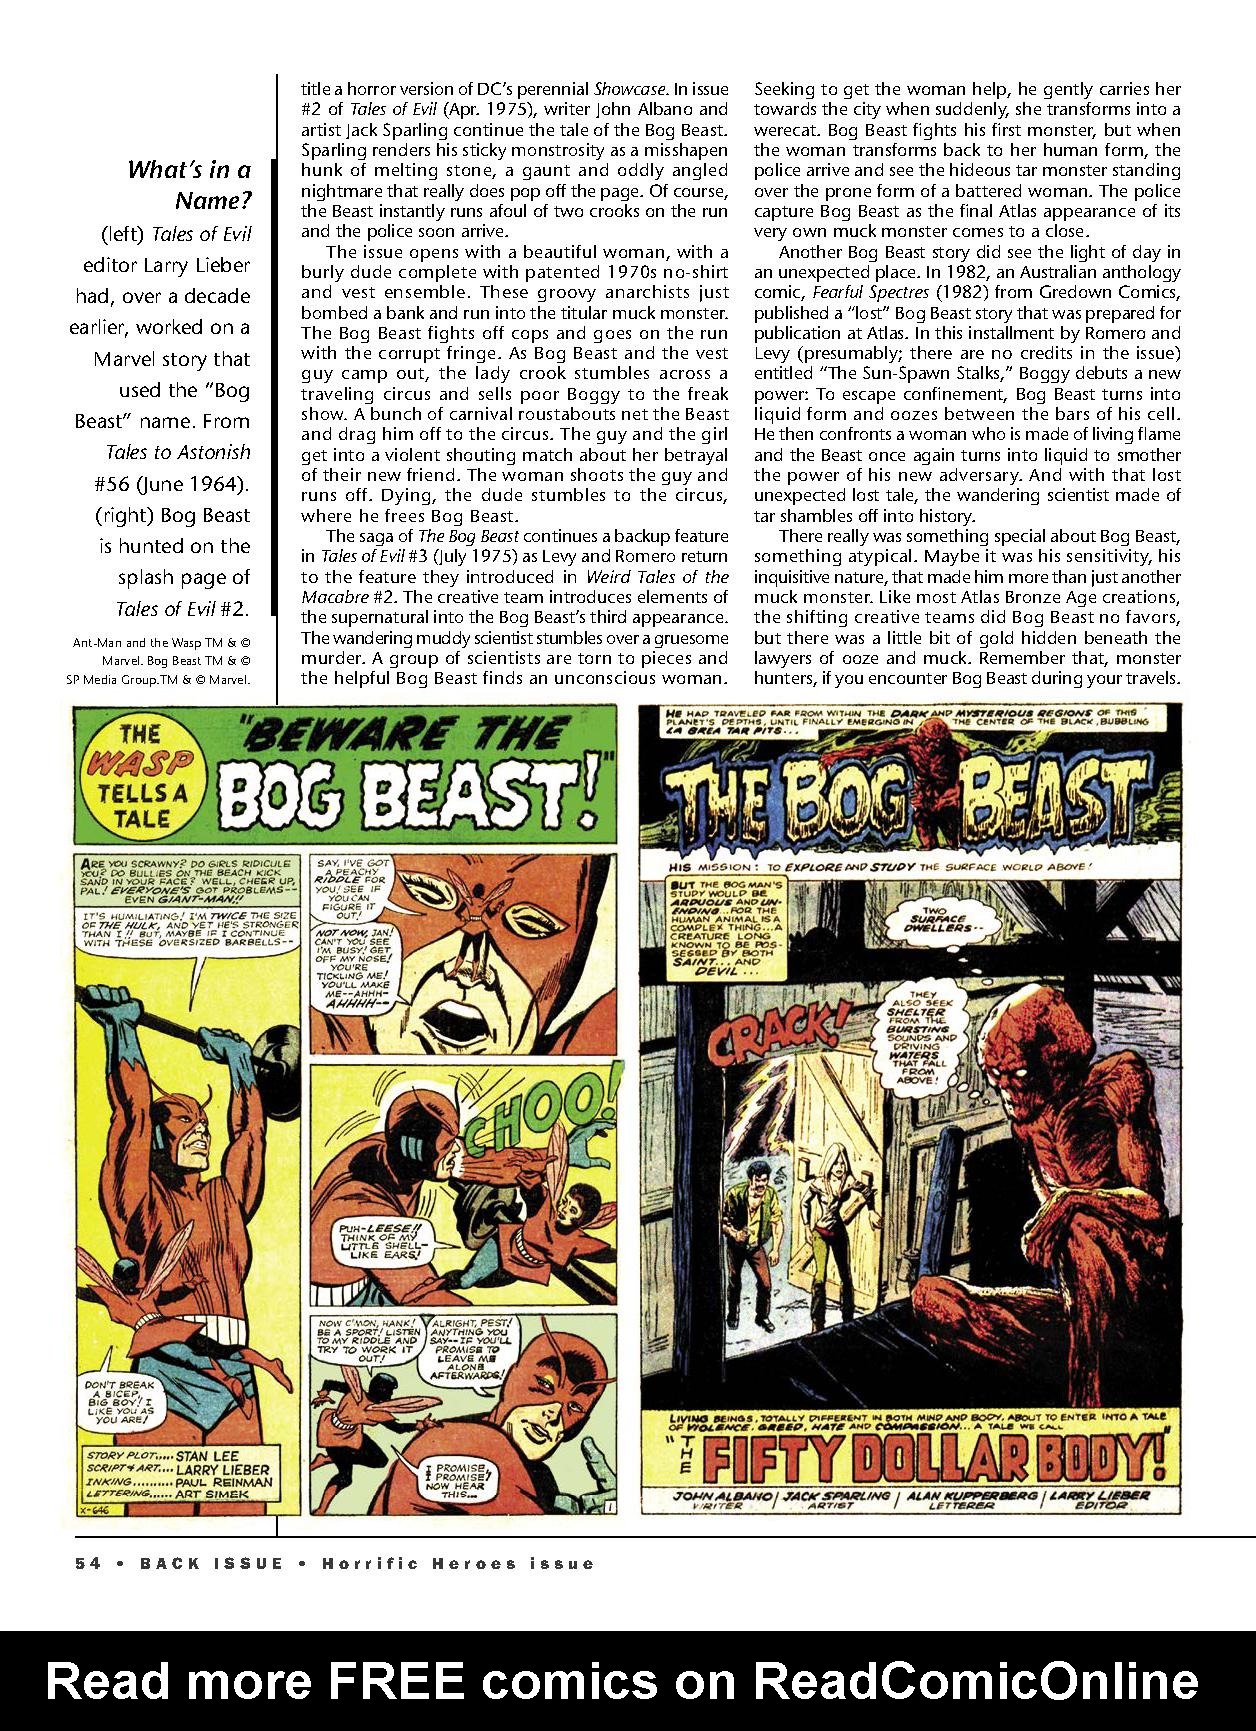 Read online Back Issue comic -  Issue #124 - 56